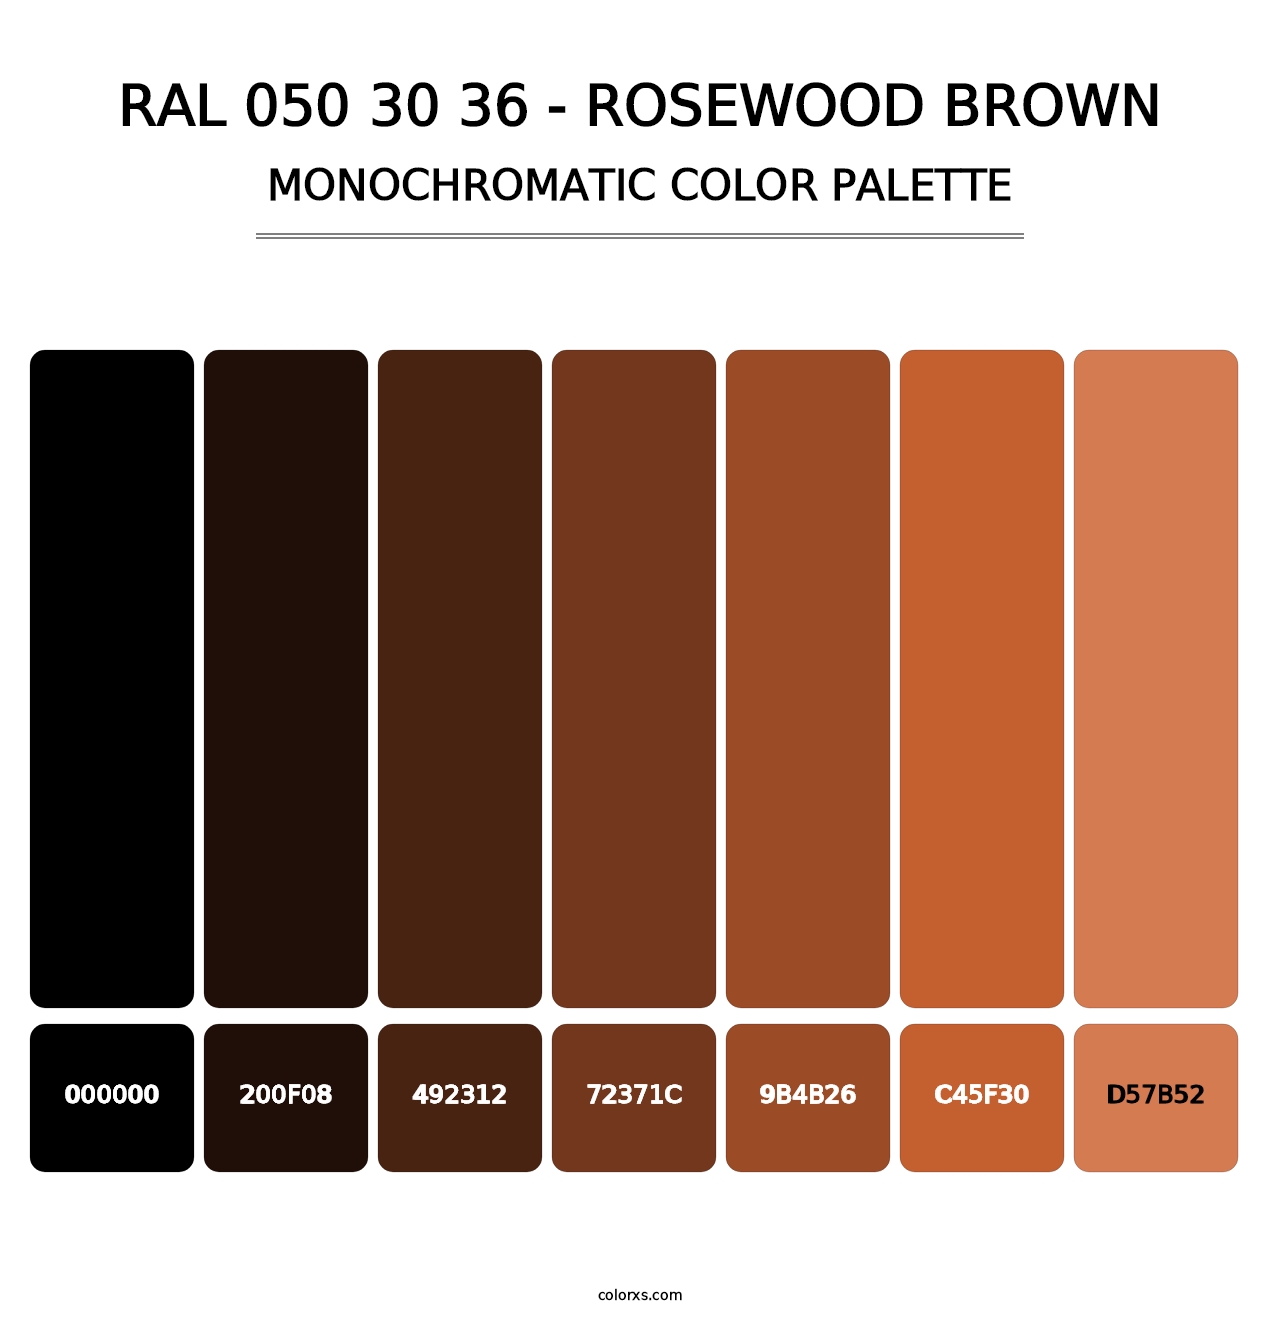 RAL 050 30 36 - Rosewood Brown - Monochromatic Color Palette